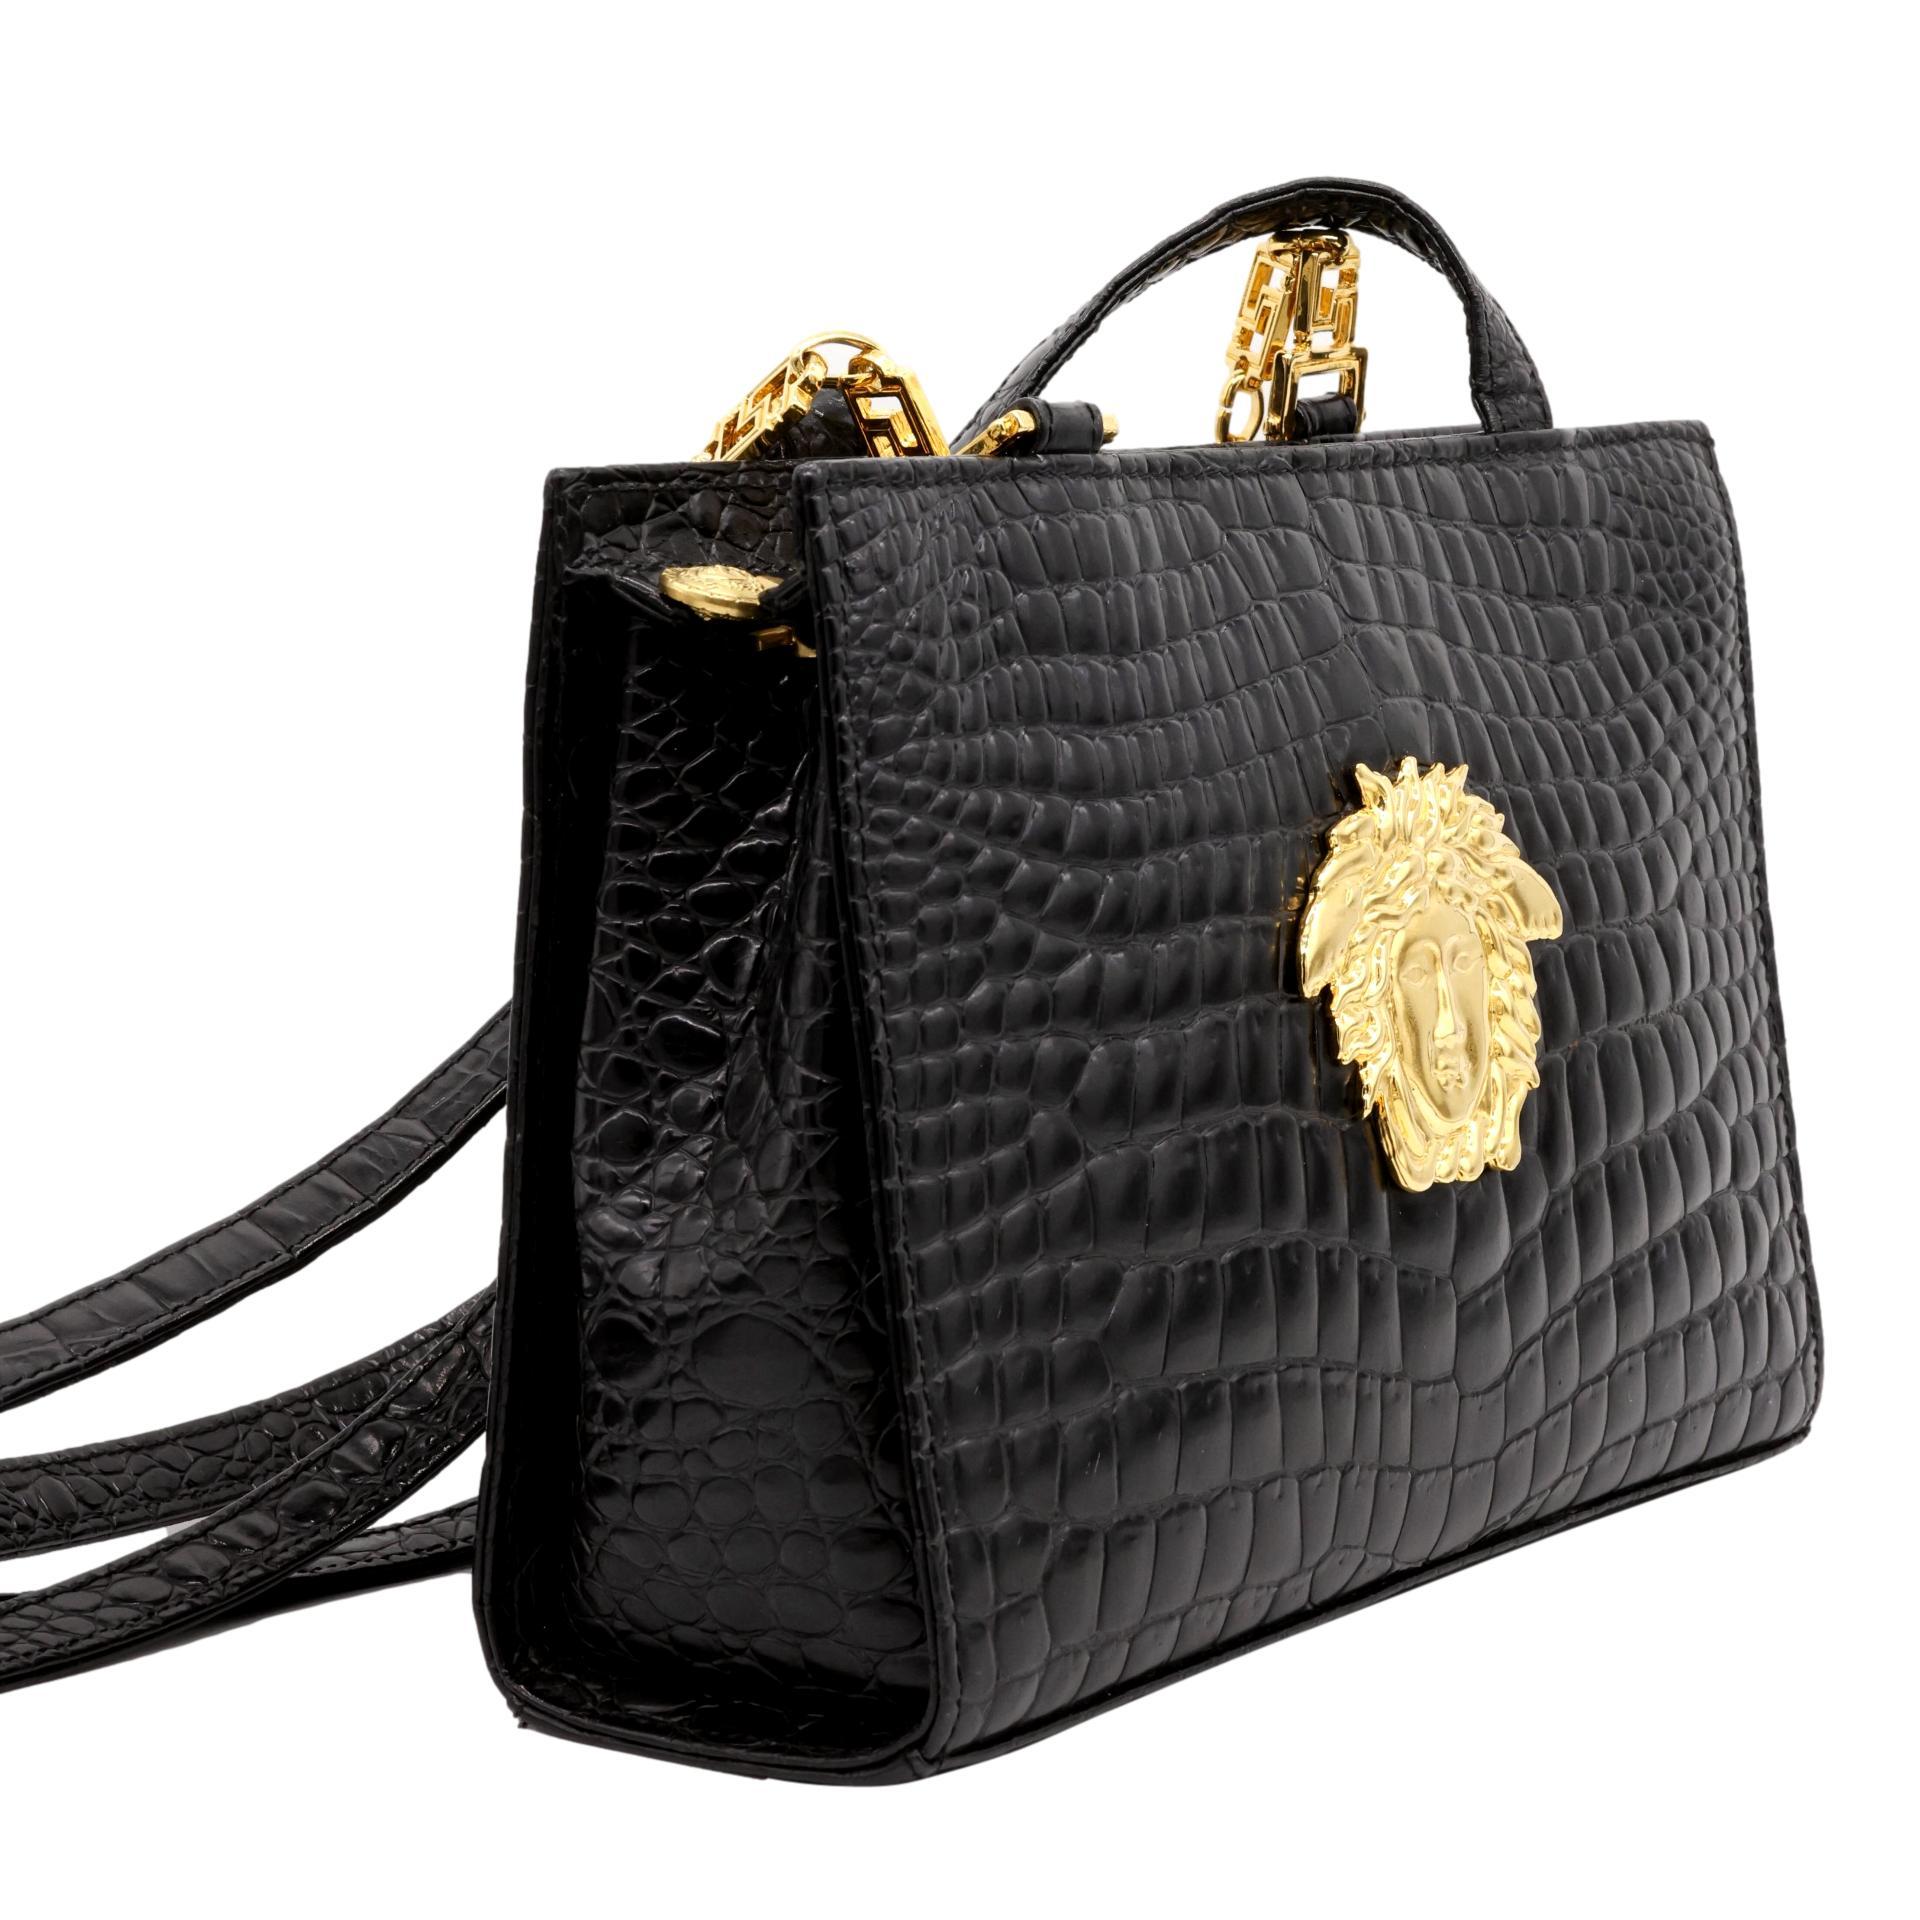 Gianni Versace Vintage Embossed Crocodile Medusa Shoulder Crossbody Bag, 1992 - 1993. Established in 1978, Gianni Versace became well known world wide for his use of bold colors and bright prints inspired and designed around ancient Greek mythology.